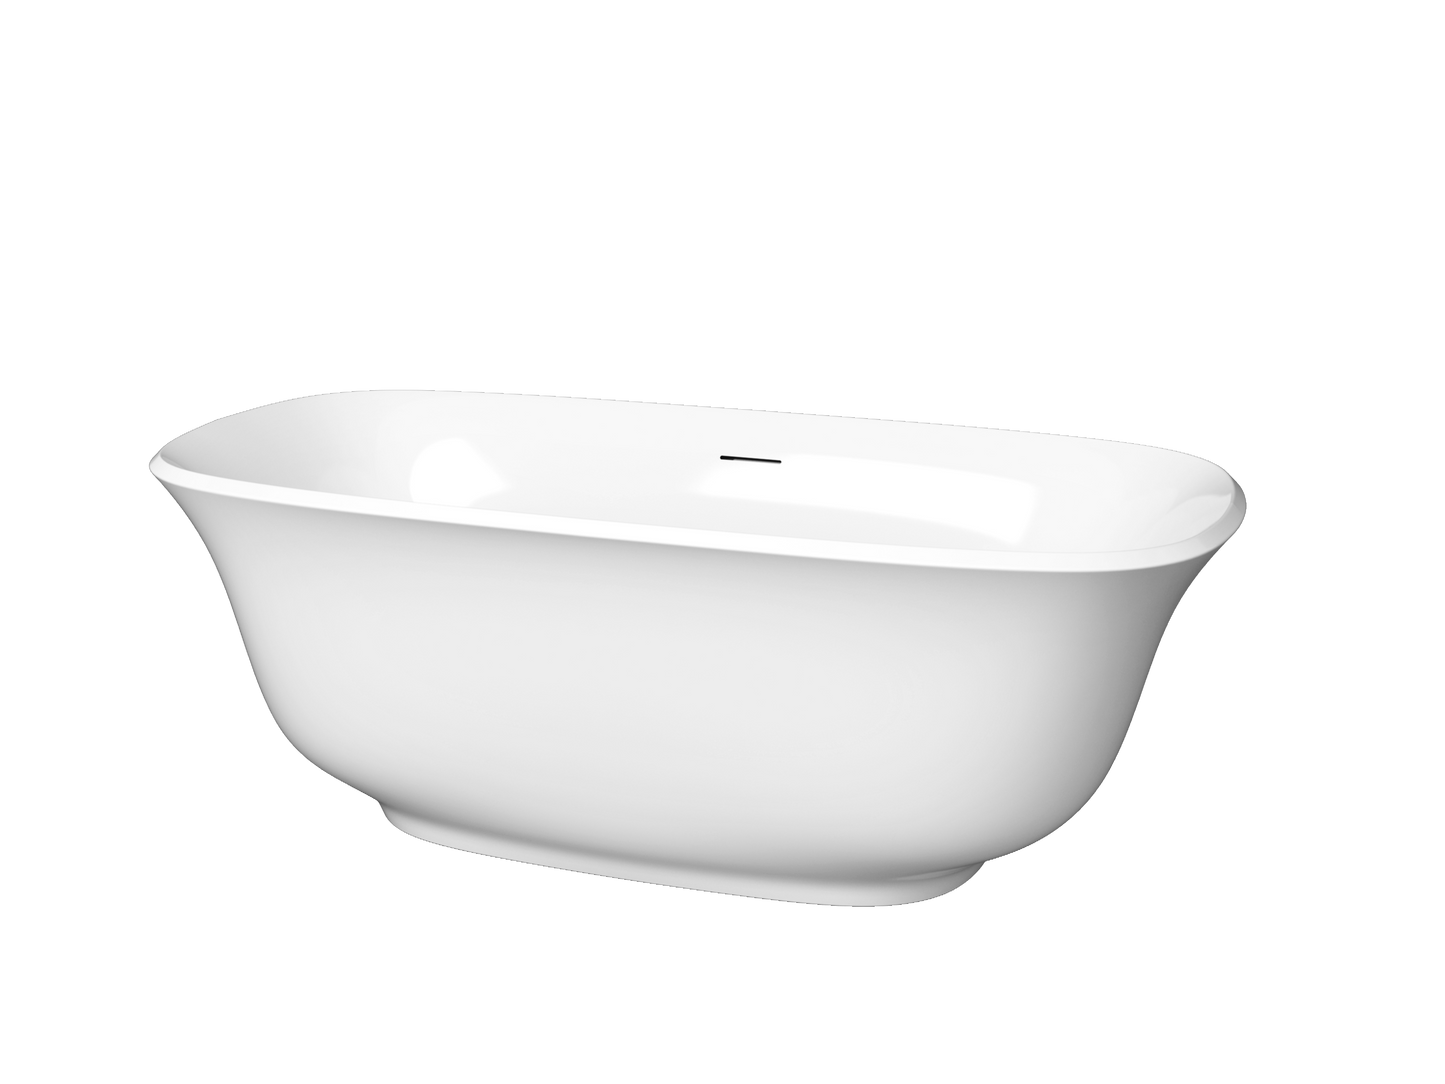 Zitta Taly White Freestanding Bathtub 67" x 31.13" x 23.75" With Elevation System and Chrome Waste & Overflow